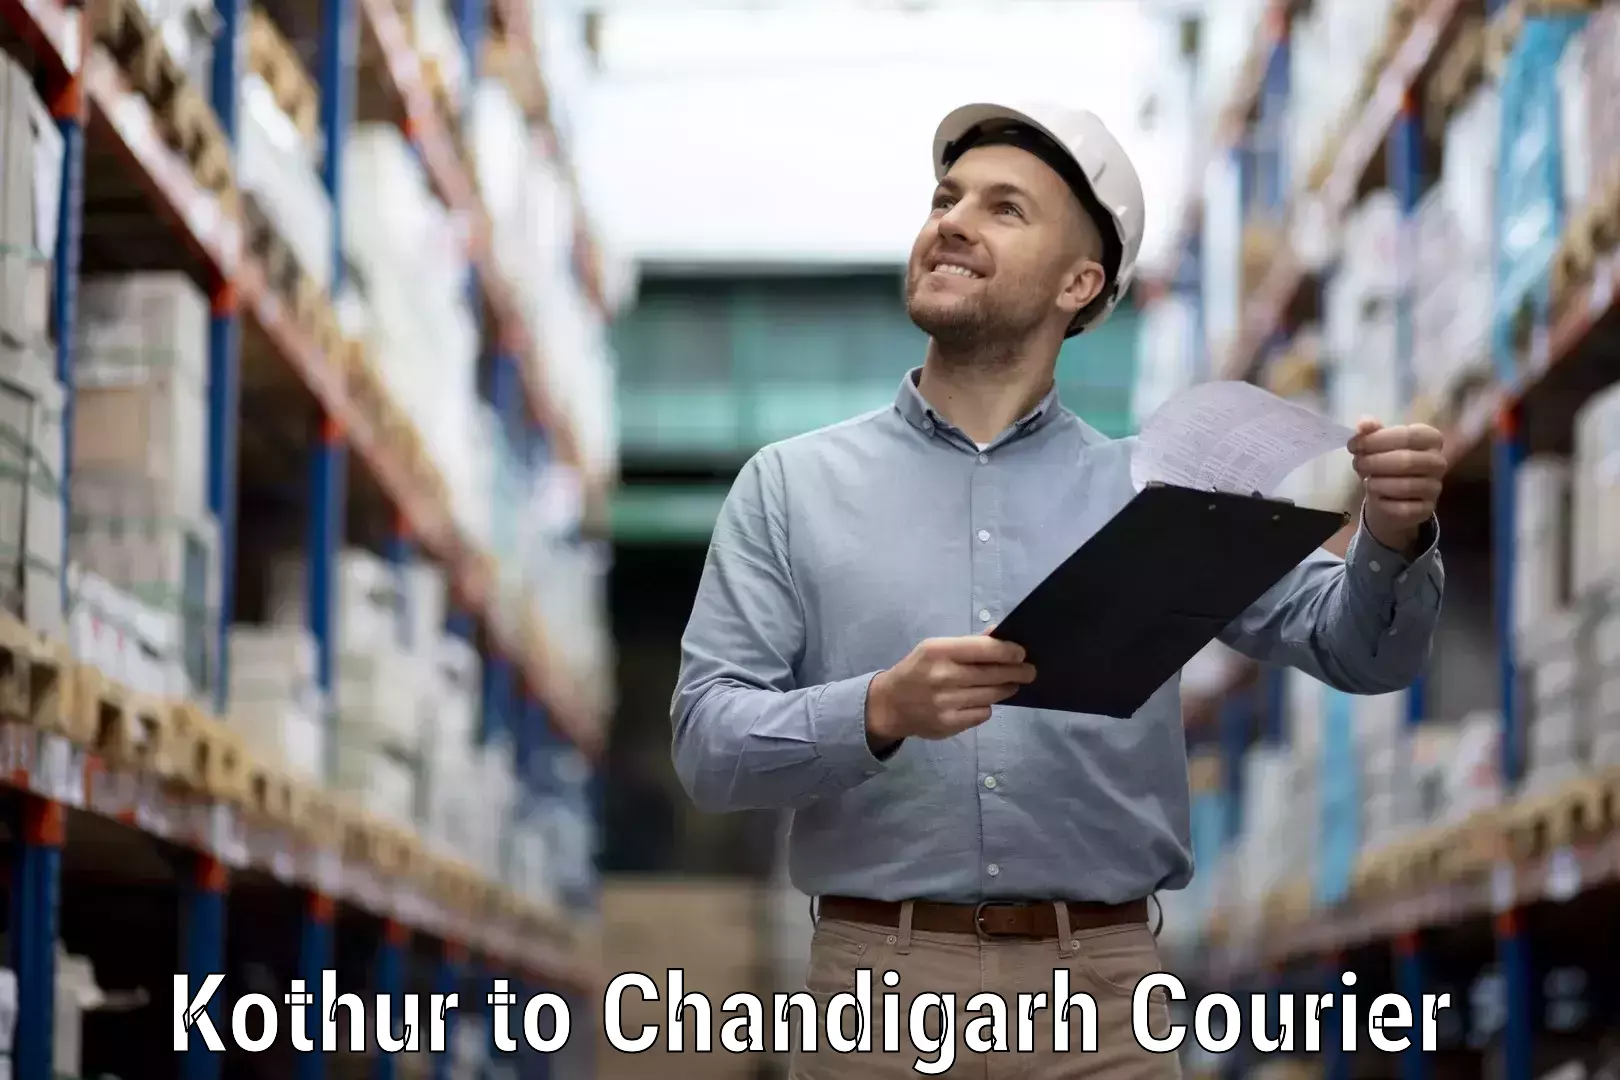 On-call courier service Kothur to Chandigarh